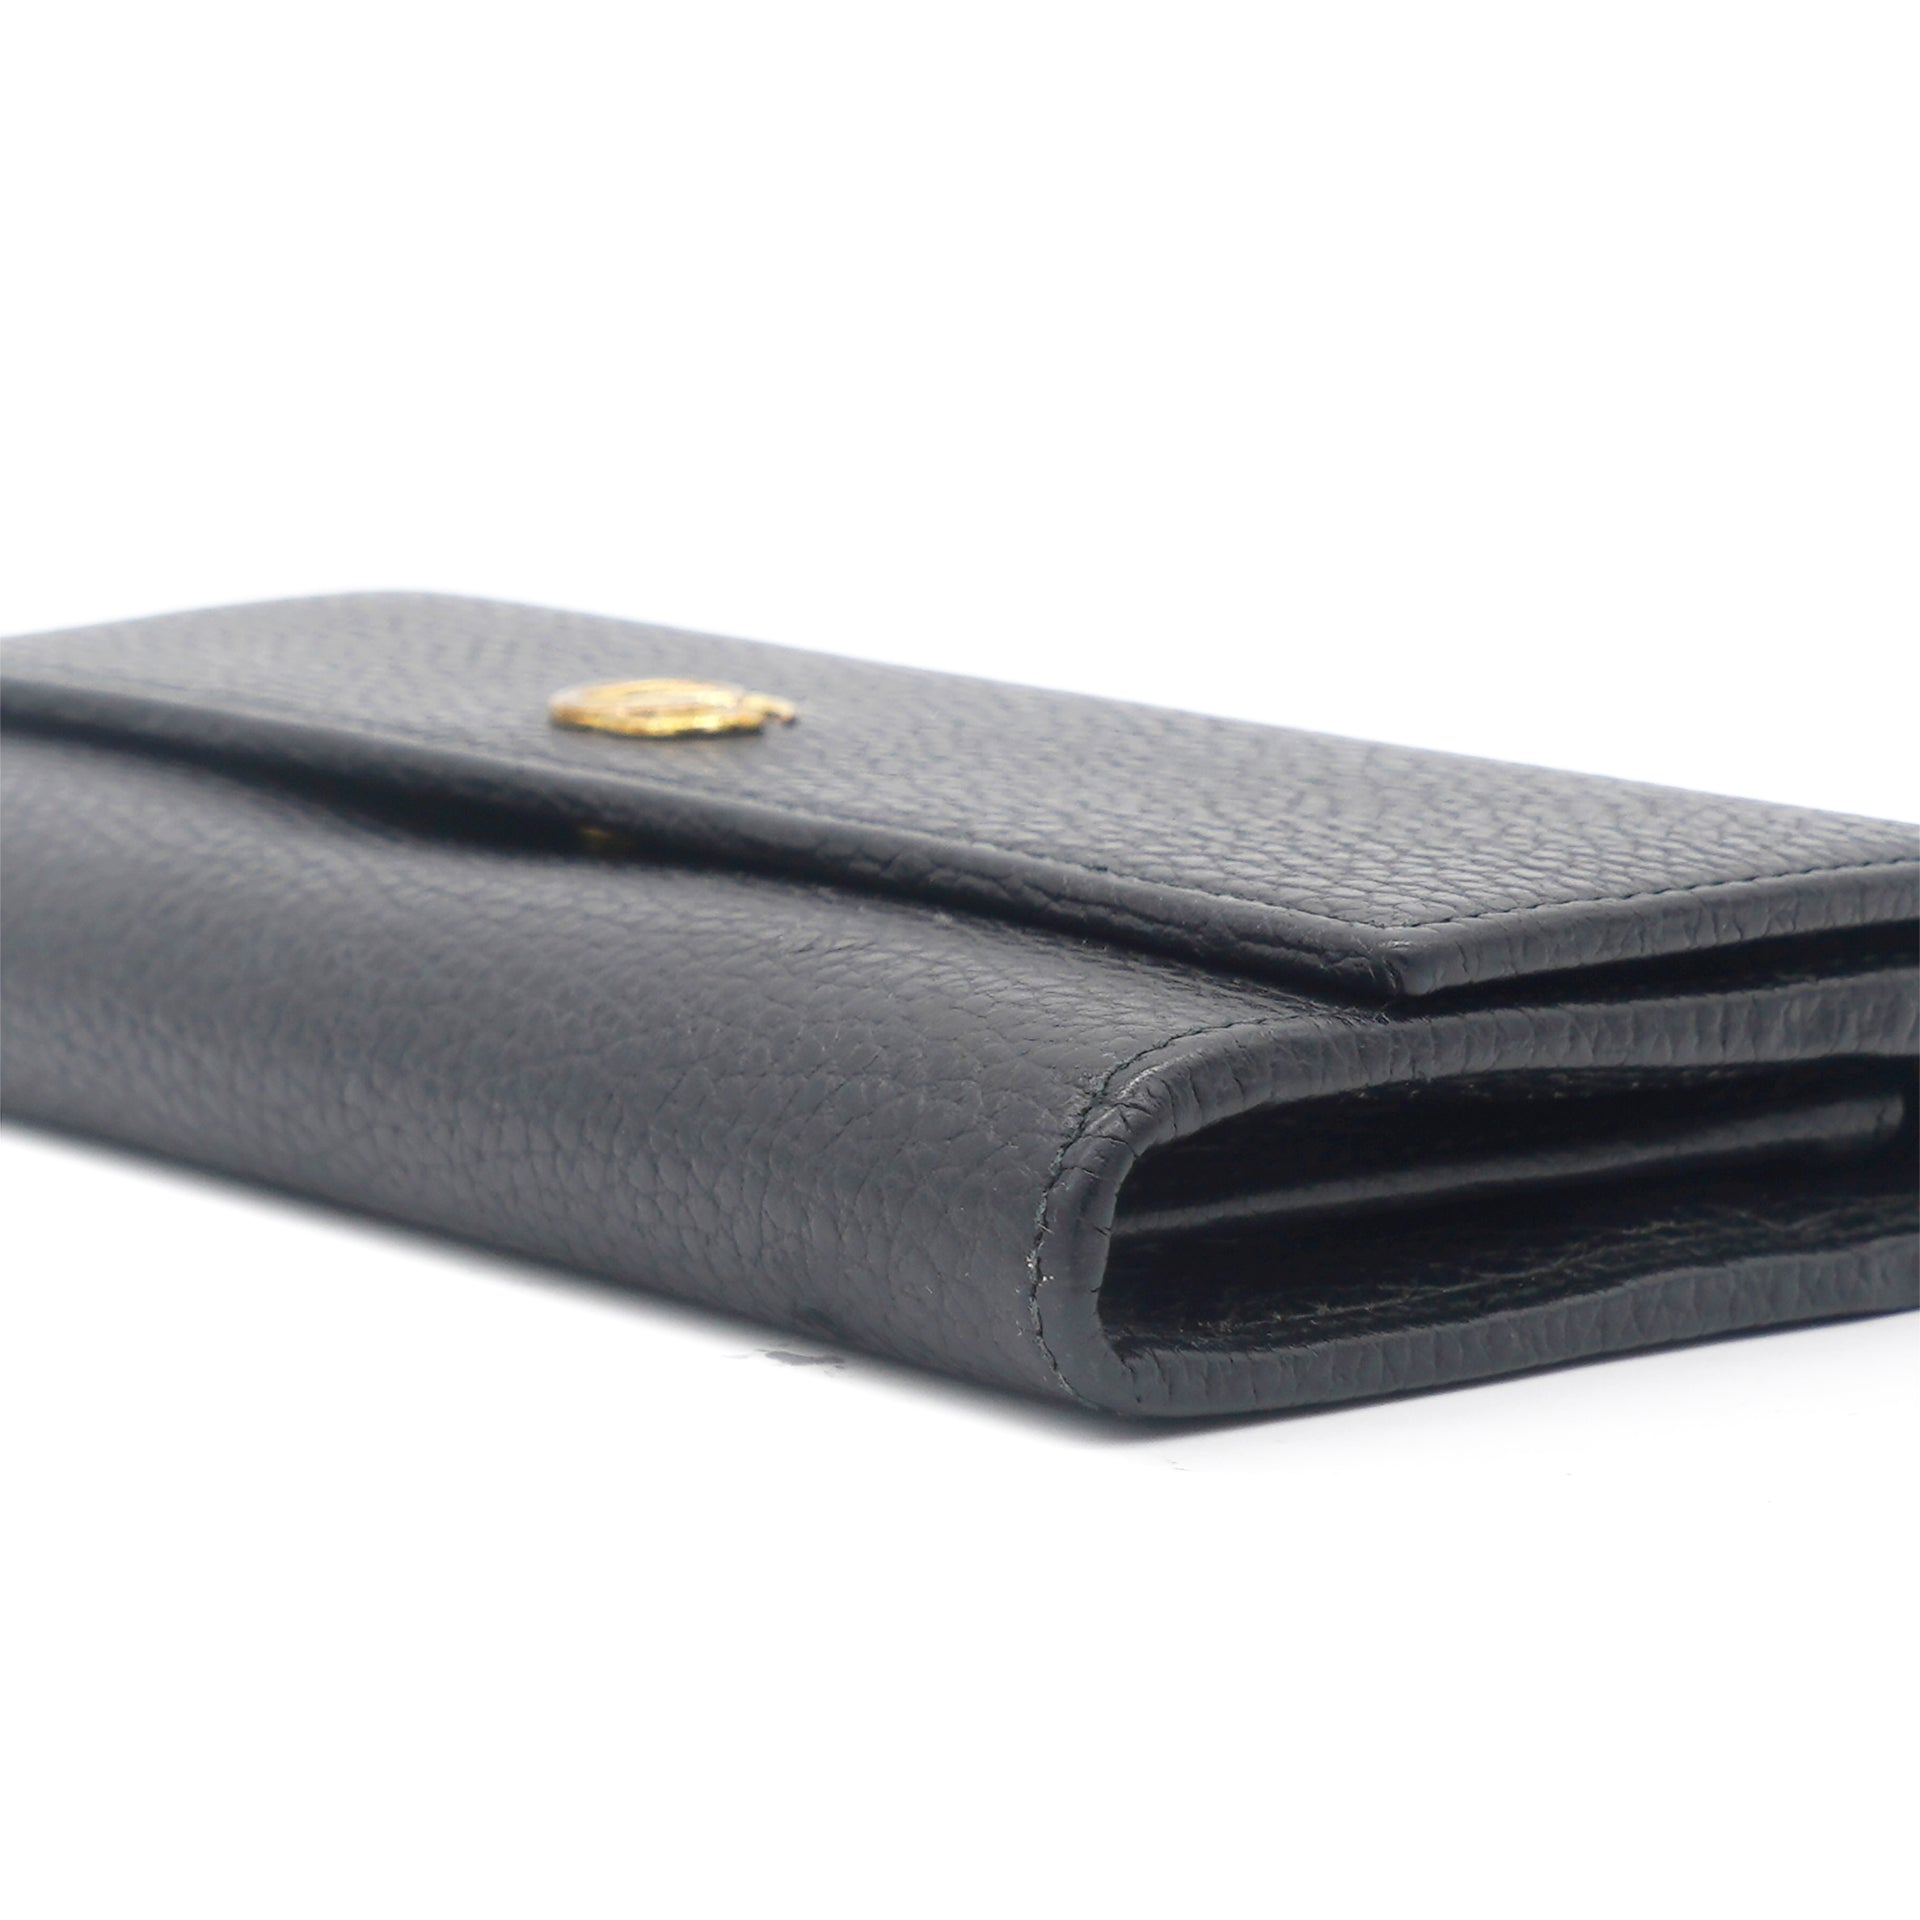 GG Marmont leather continental wallet